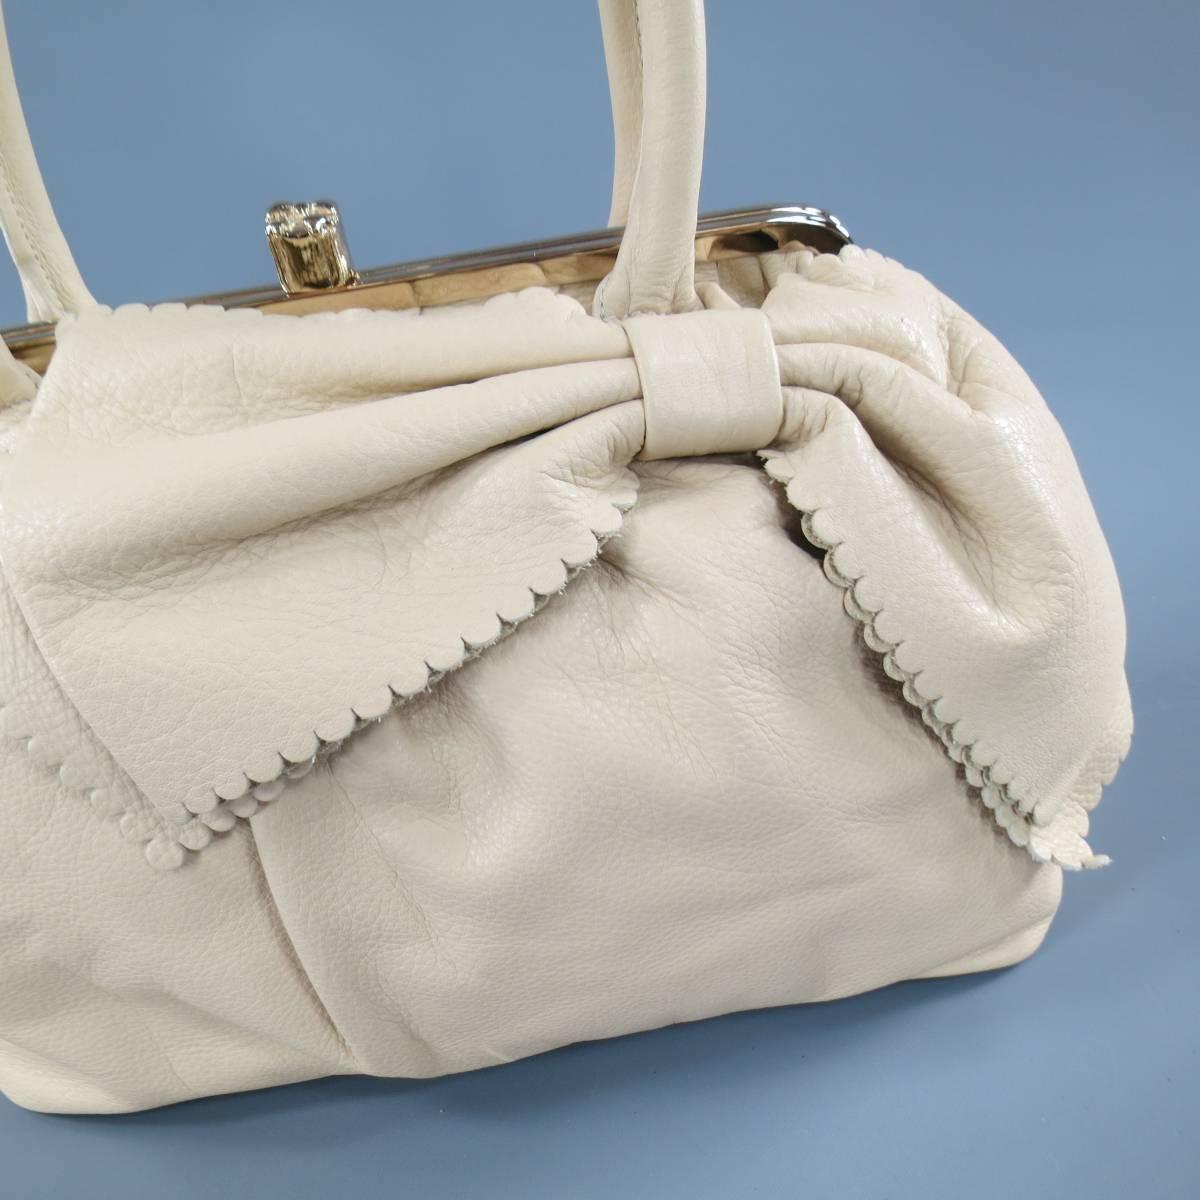 This lovely RED by VALENTINO purse comes in soft beige leather with a pleated top, oversized scalloped bow applique, gold tone hinge closure, leather top handles, and pink liner. With dust bag and tags. Circa 2012. Retails at $695.00.
 
Excellent